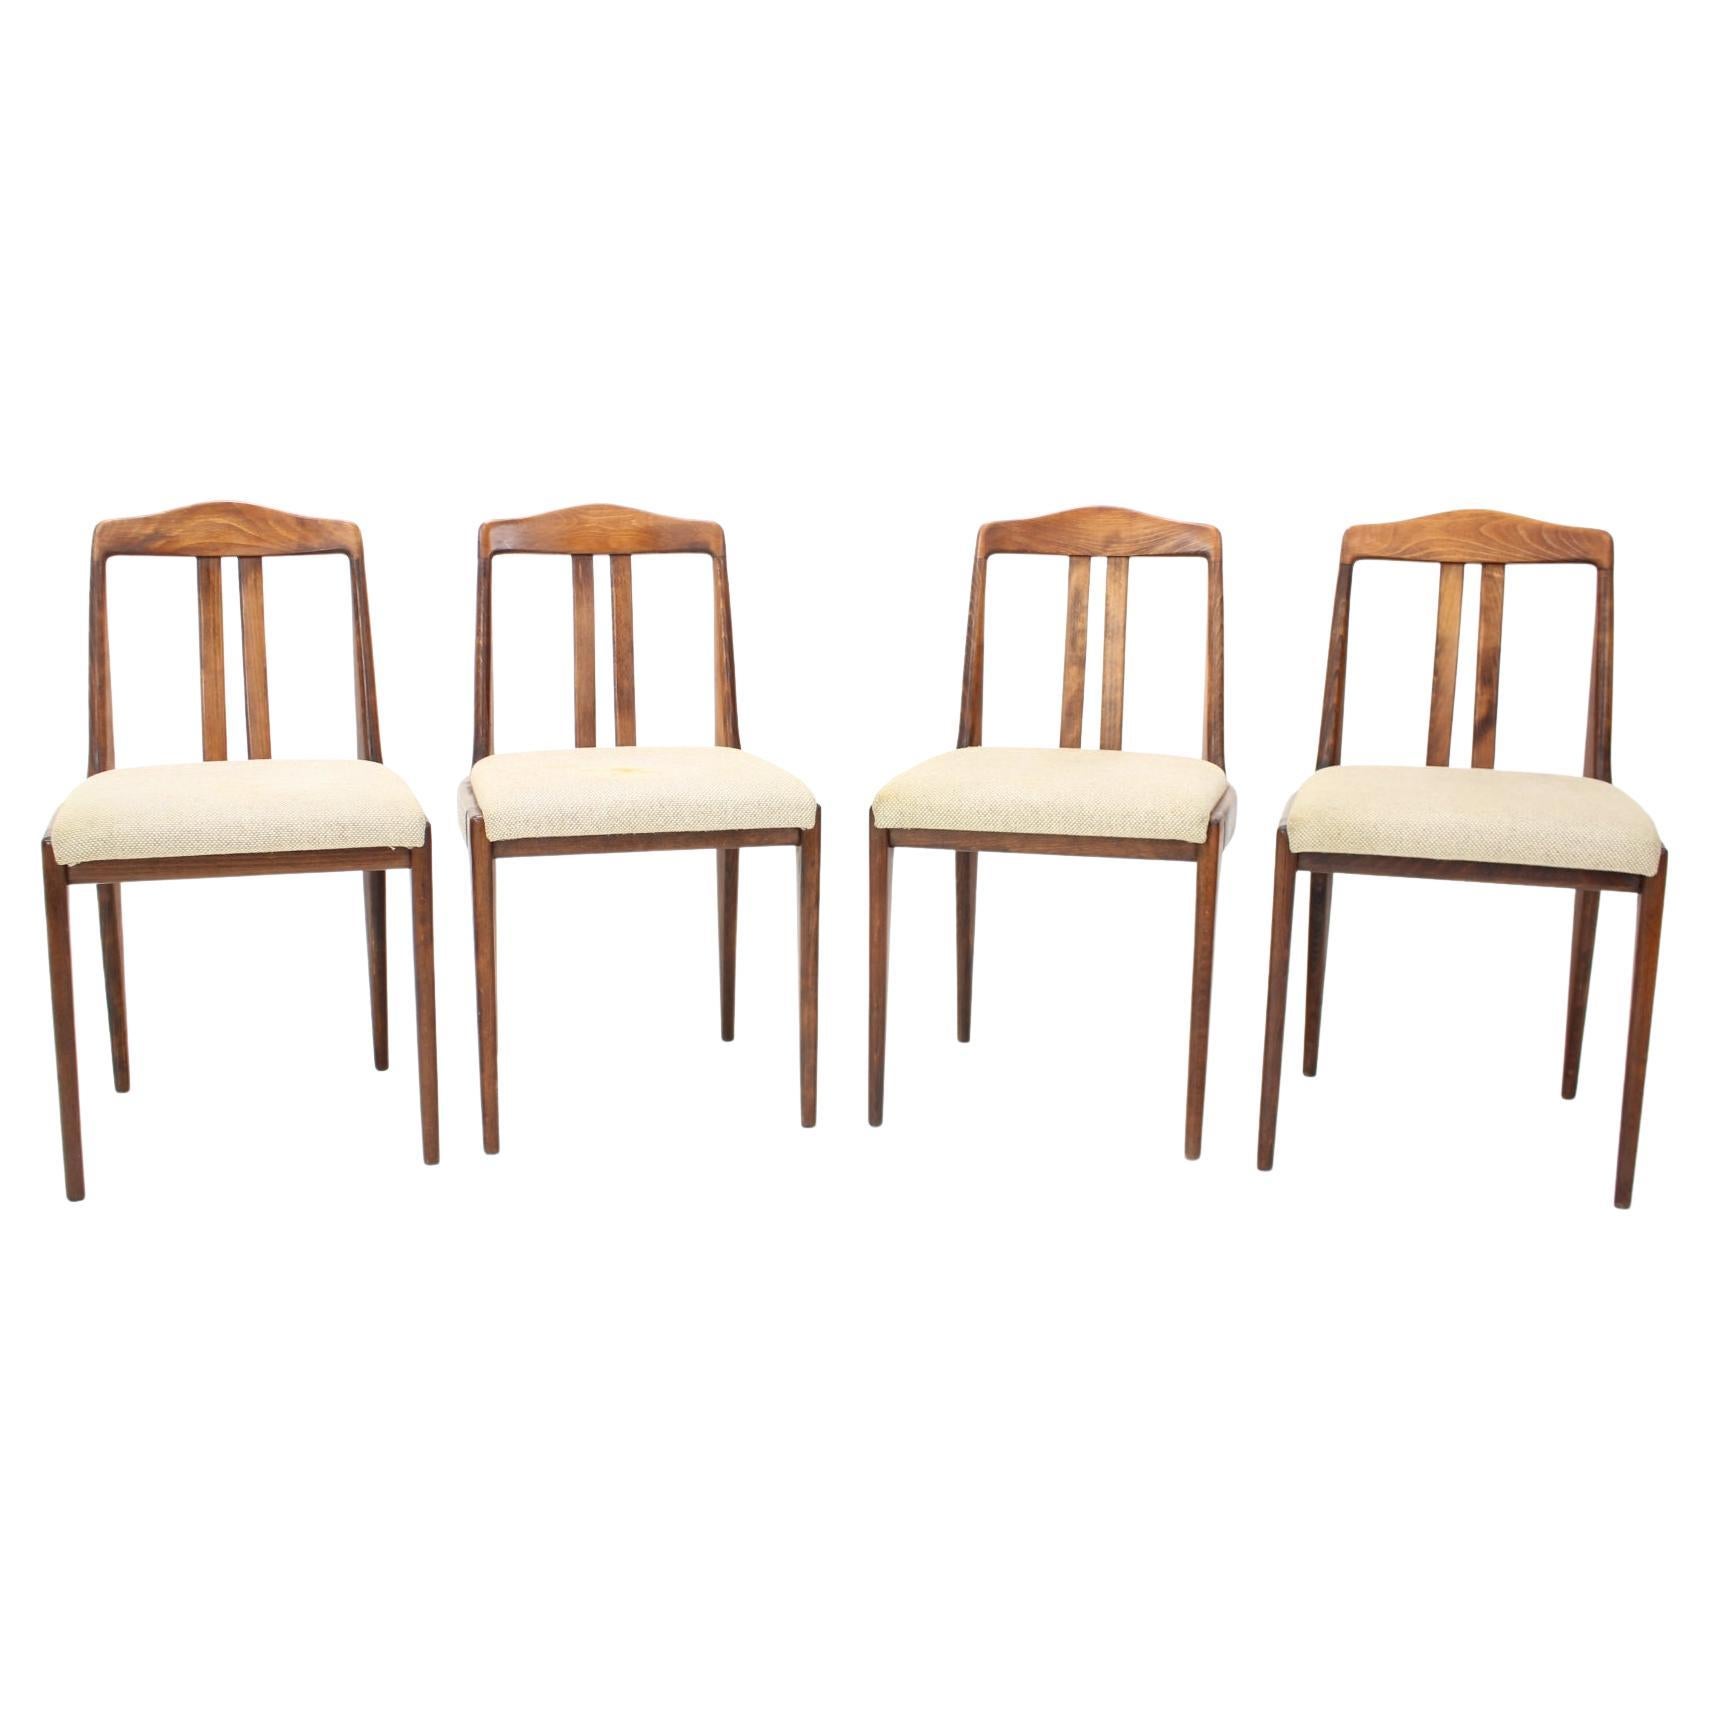 1970s Set of Four Dining Chairs by Drevotvar, Czechoslovakia For Sale